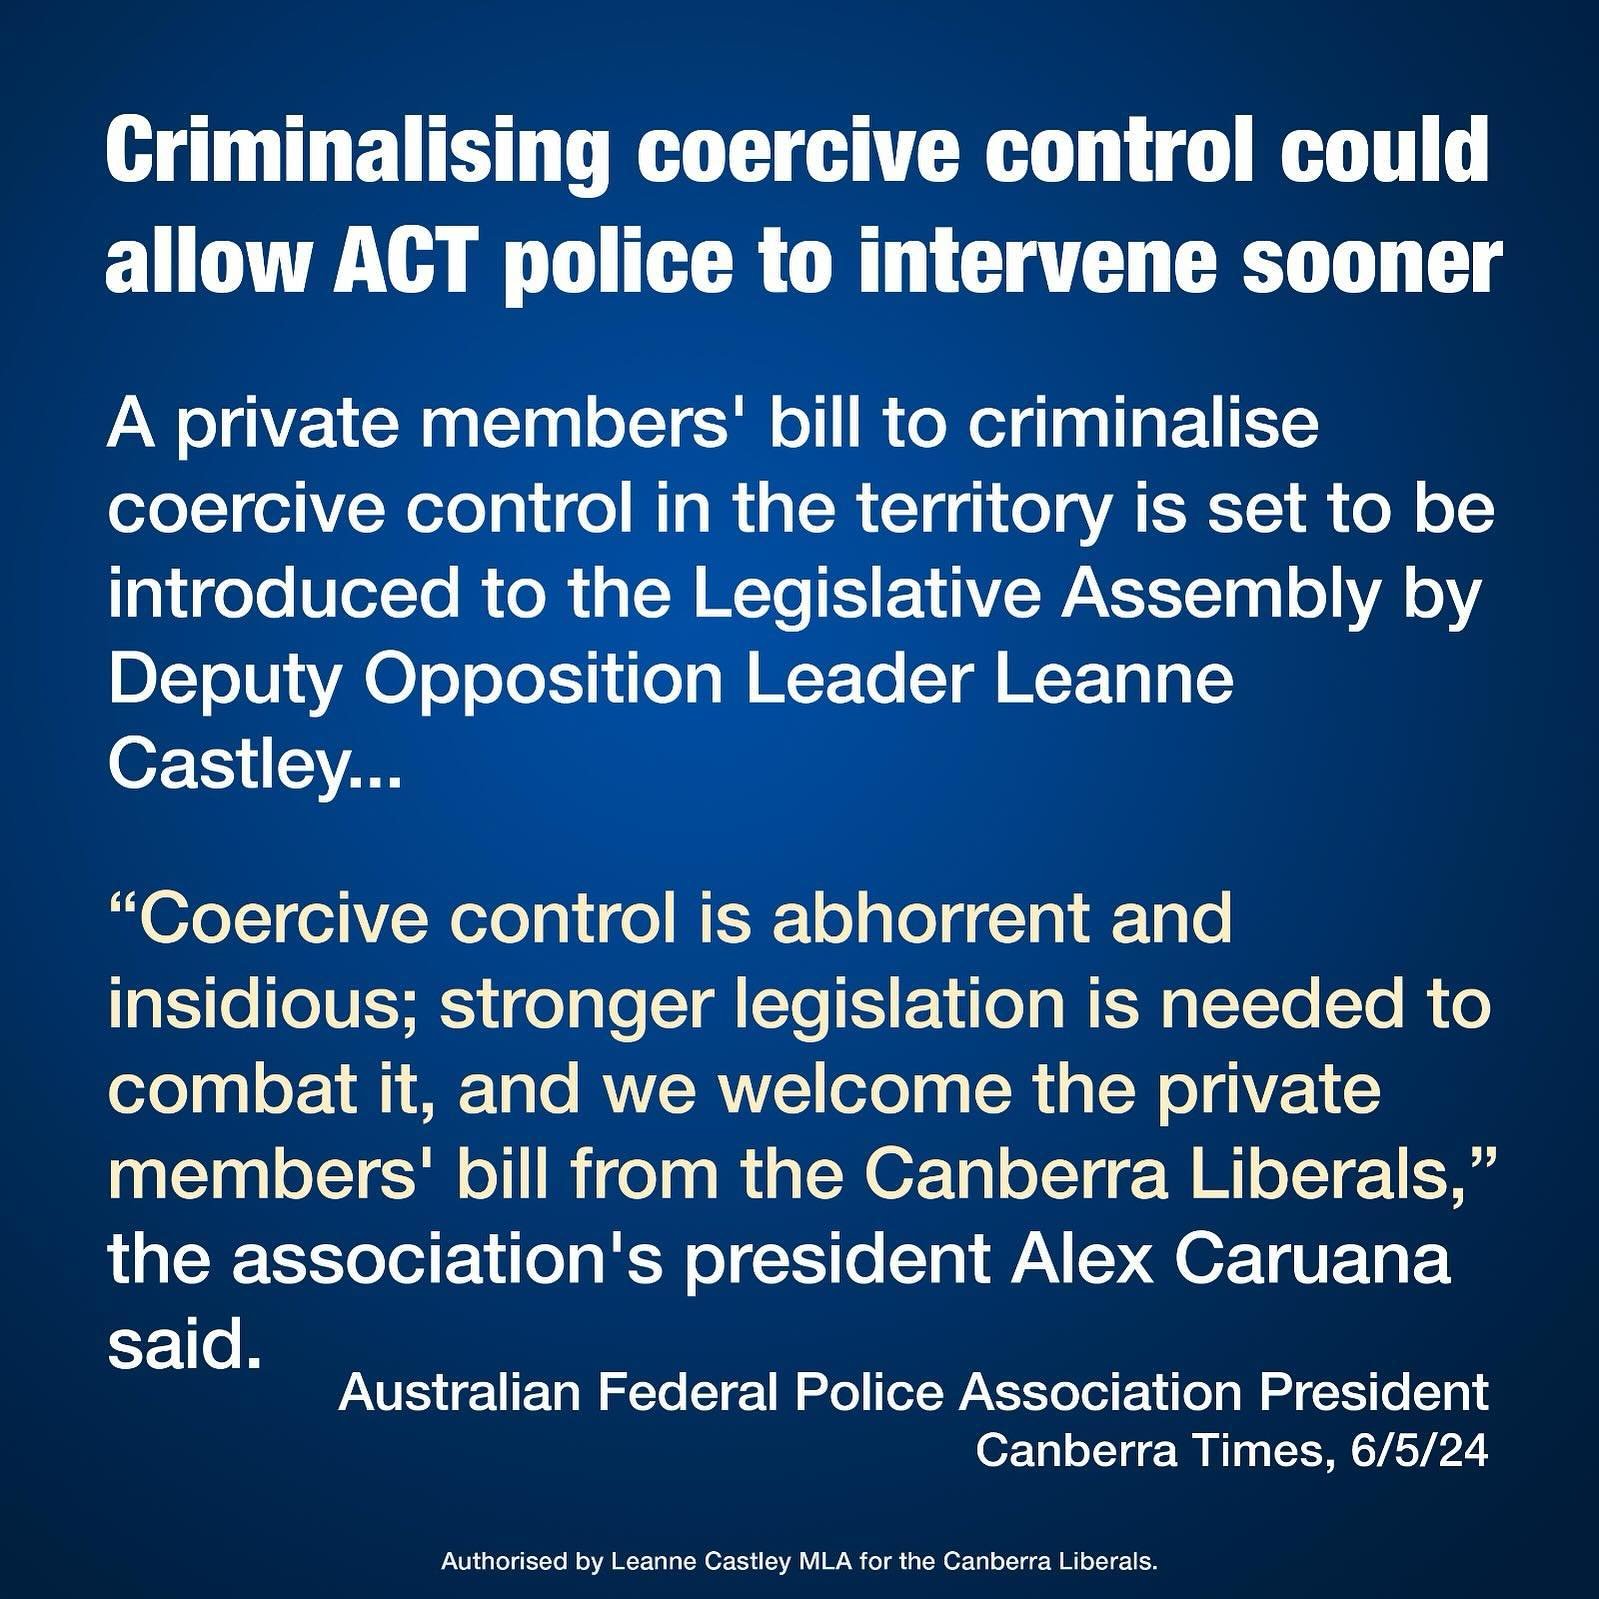 As recently announced by Leanne Castley MLA and me, the Canberra Liberals will move a Private Members&rsquo; Bill in the Assembly to introduce new coercive control laws, creating a standalone criminal offence for an &lsquo;abhorrent and insidious&rsq